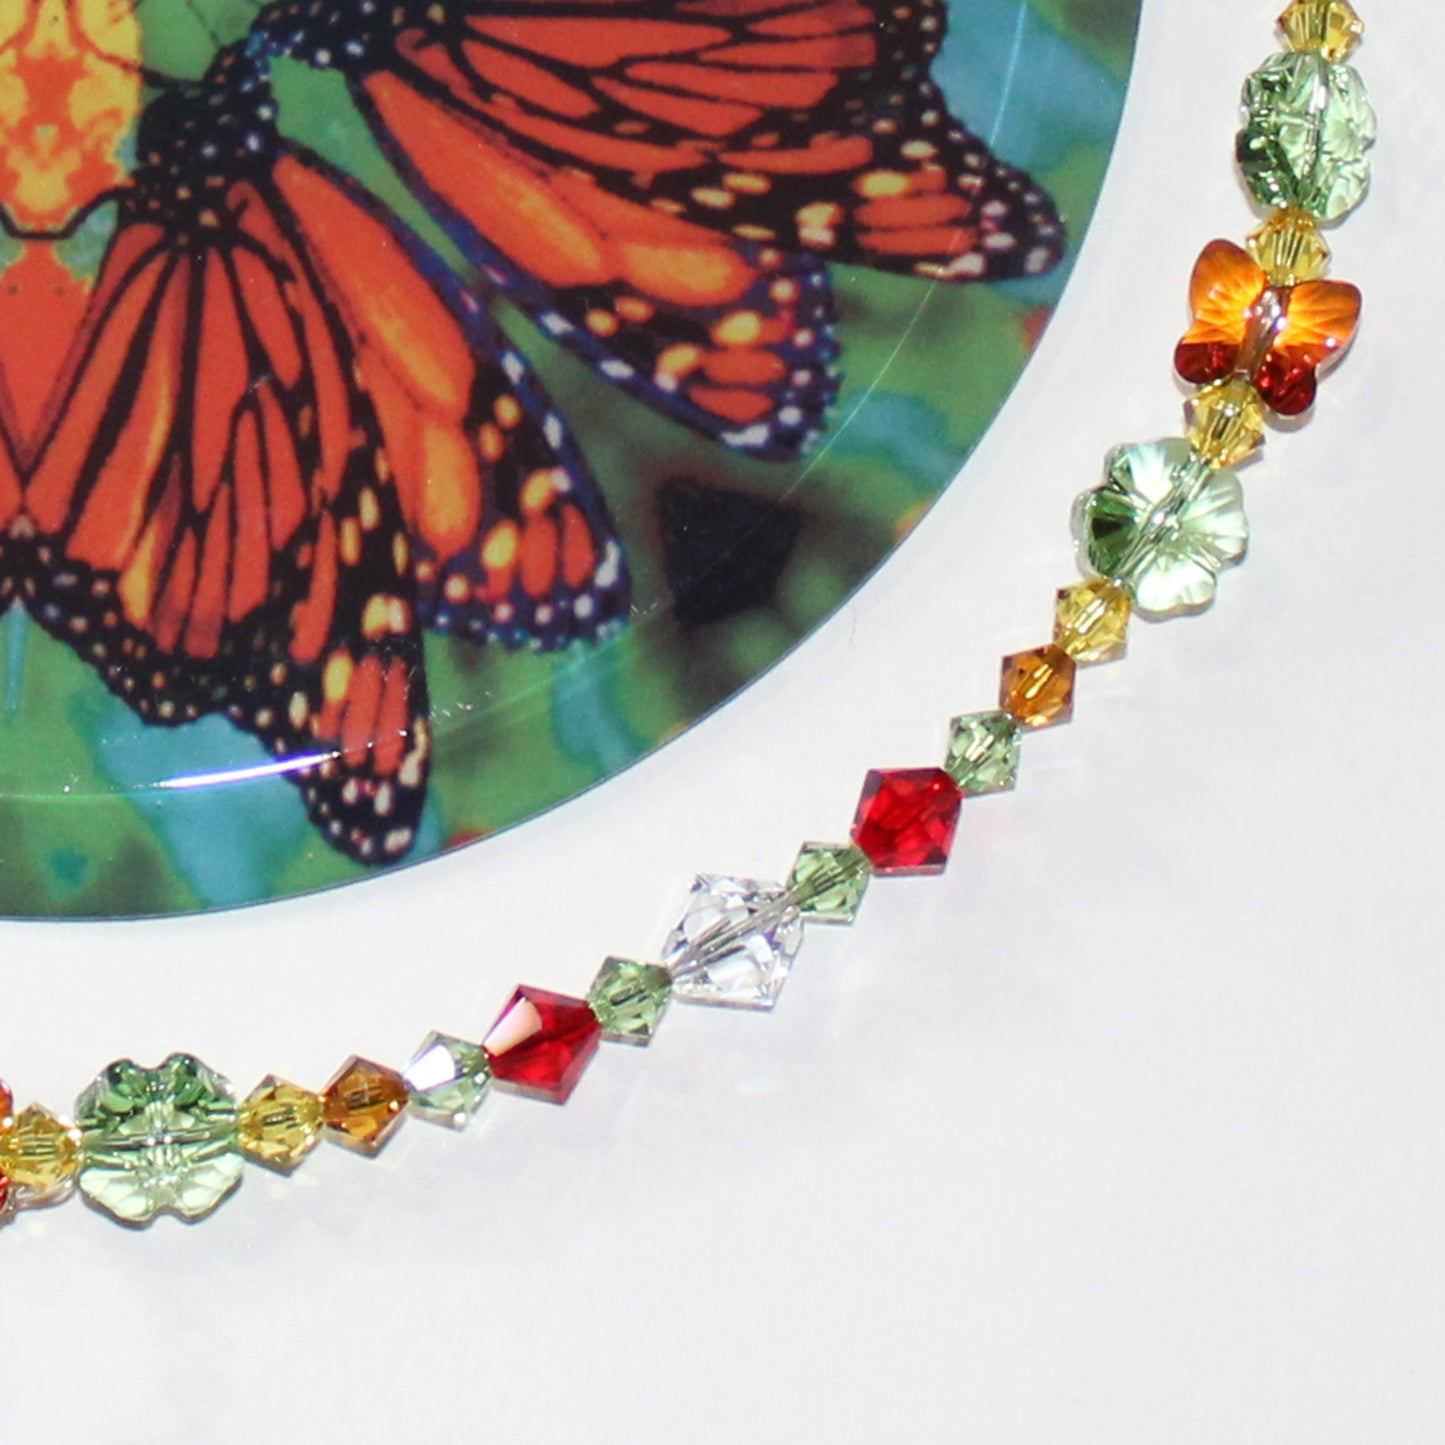 Monarch Butterfly Lover Sunlight Catcher, Crystal Window Sun Catcher With Swarovski Crystals & Prism, Mindfulness Gift, Timeless Treasure close up of beads